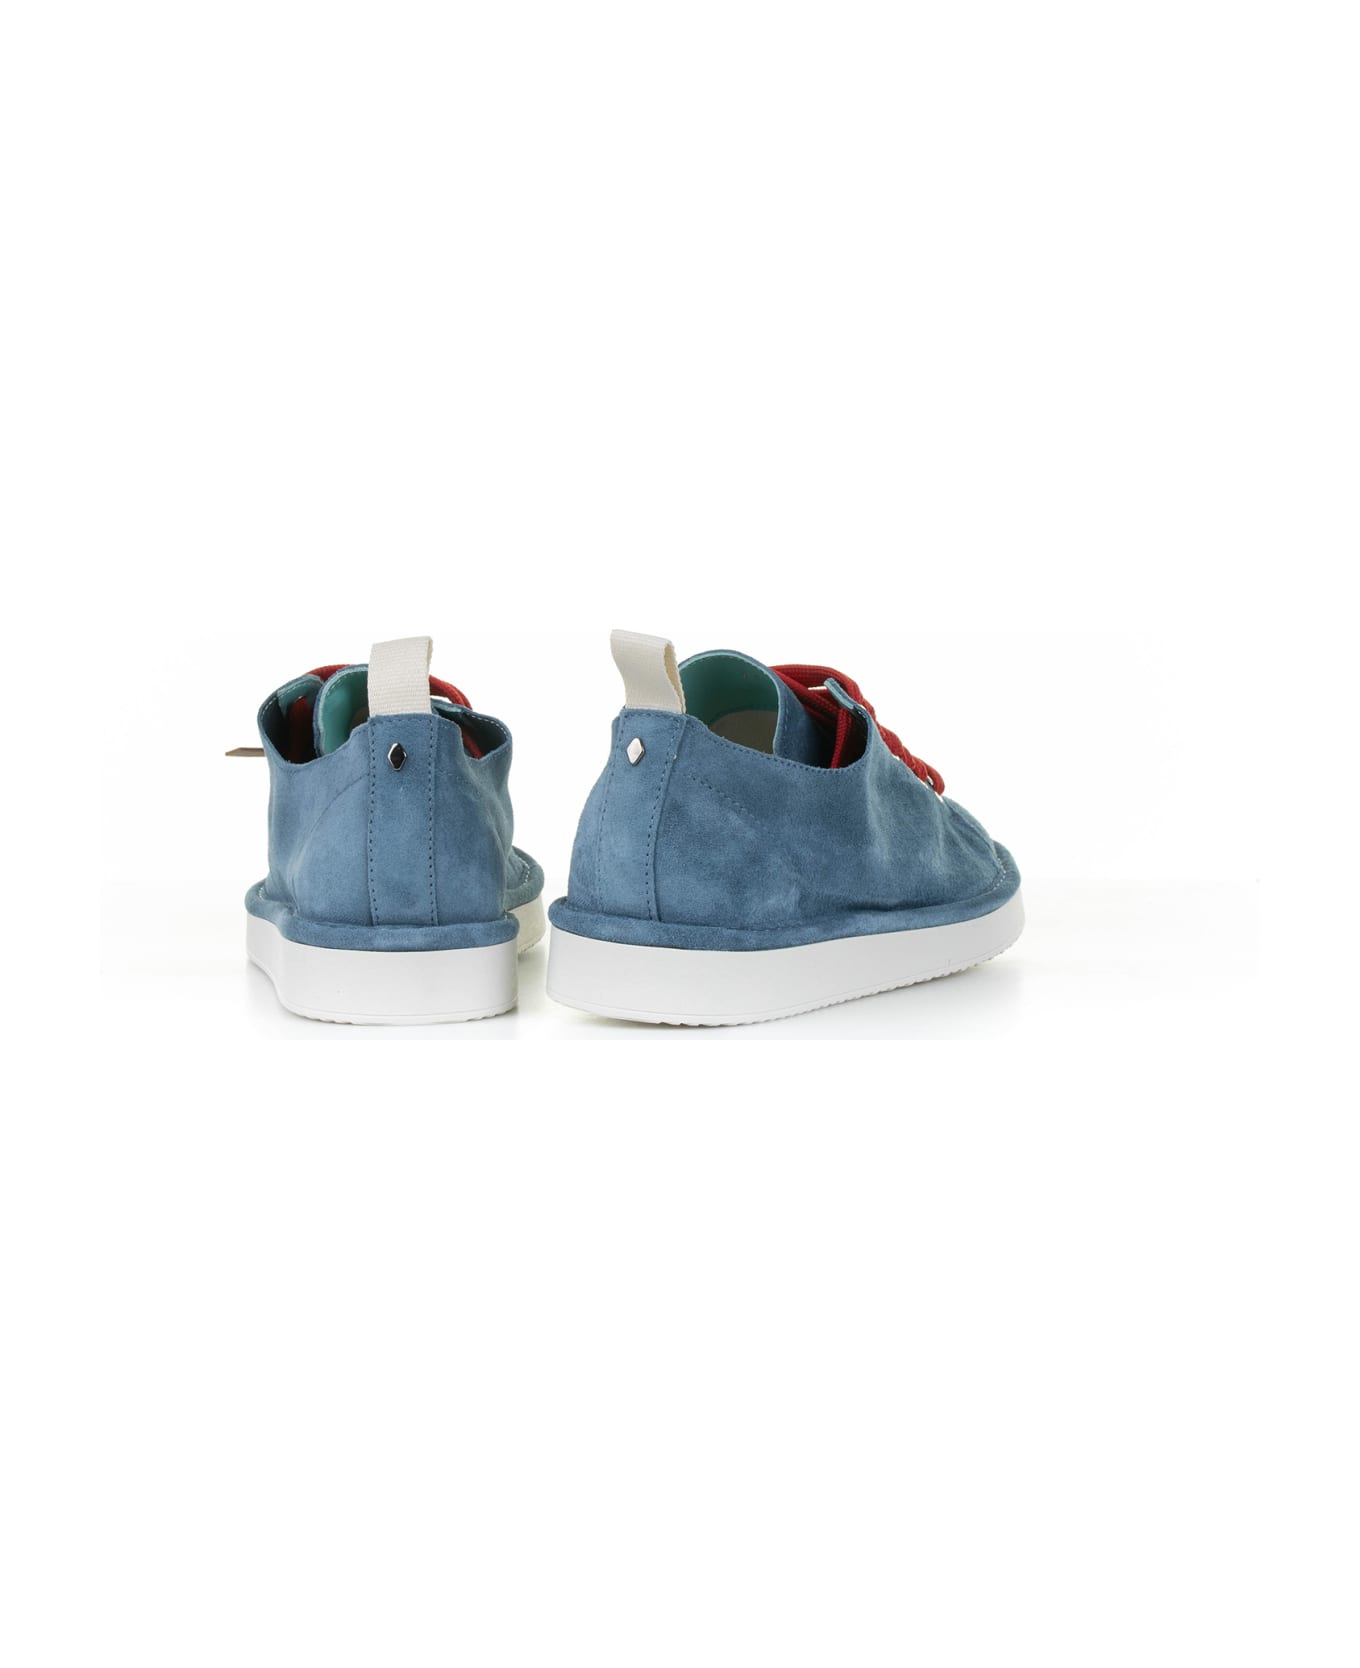 Panchic Sneaker In Blue Suede - BASIC BLUE- RED スニーカー